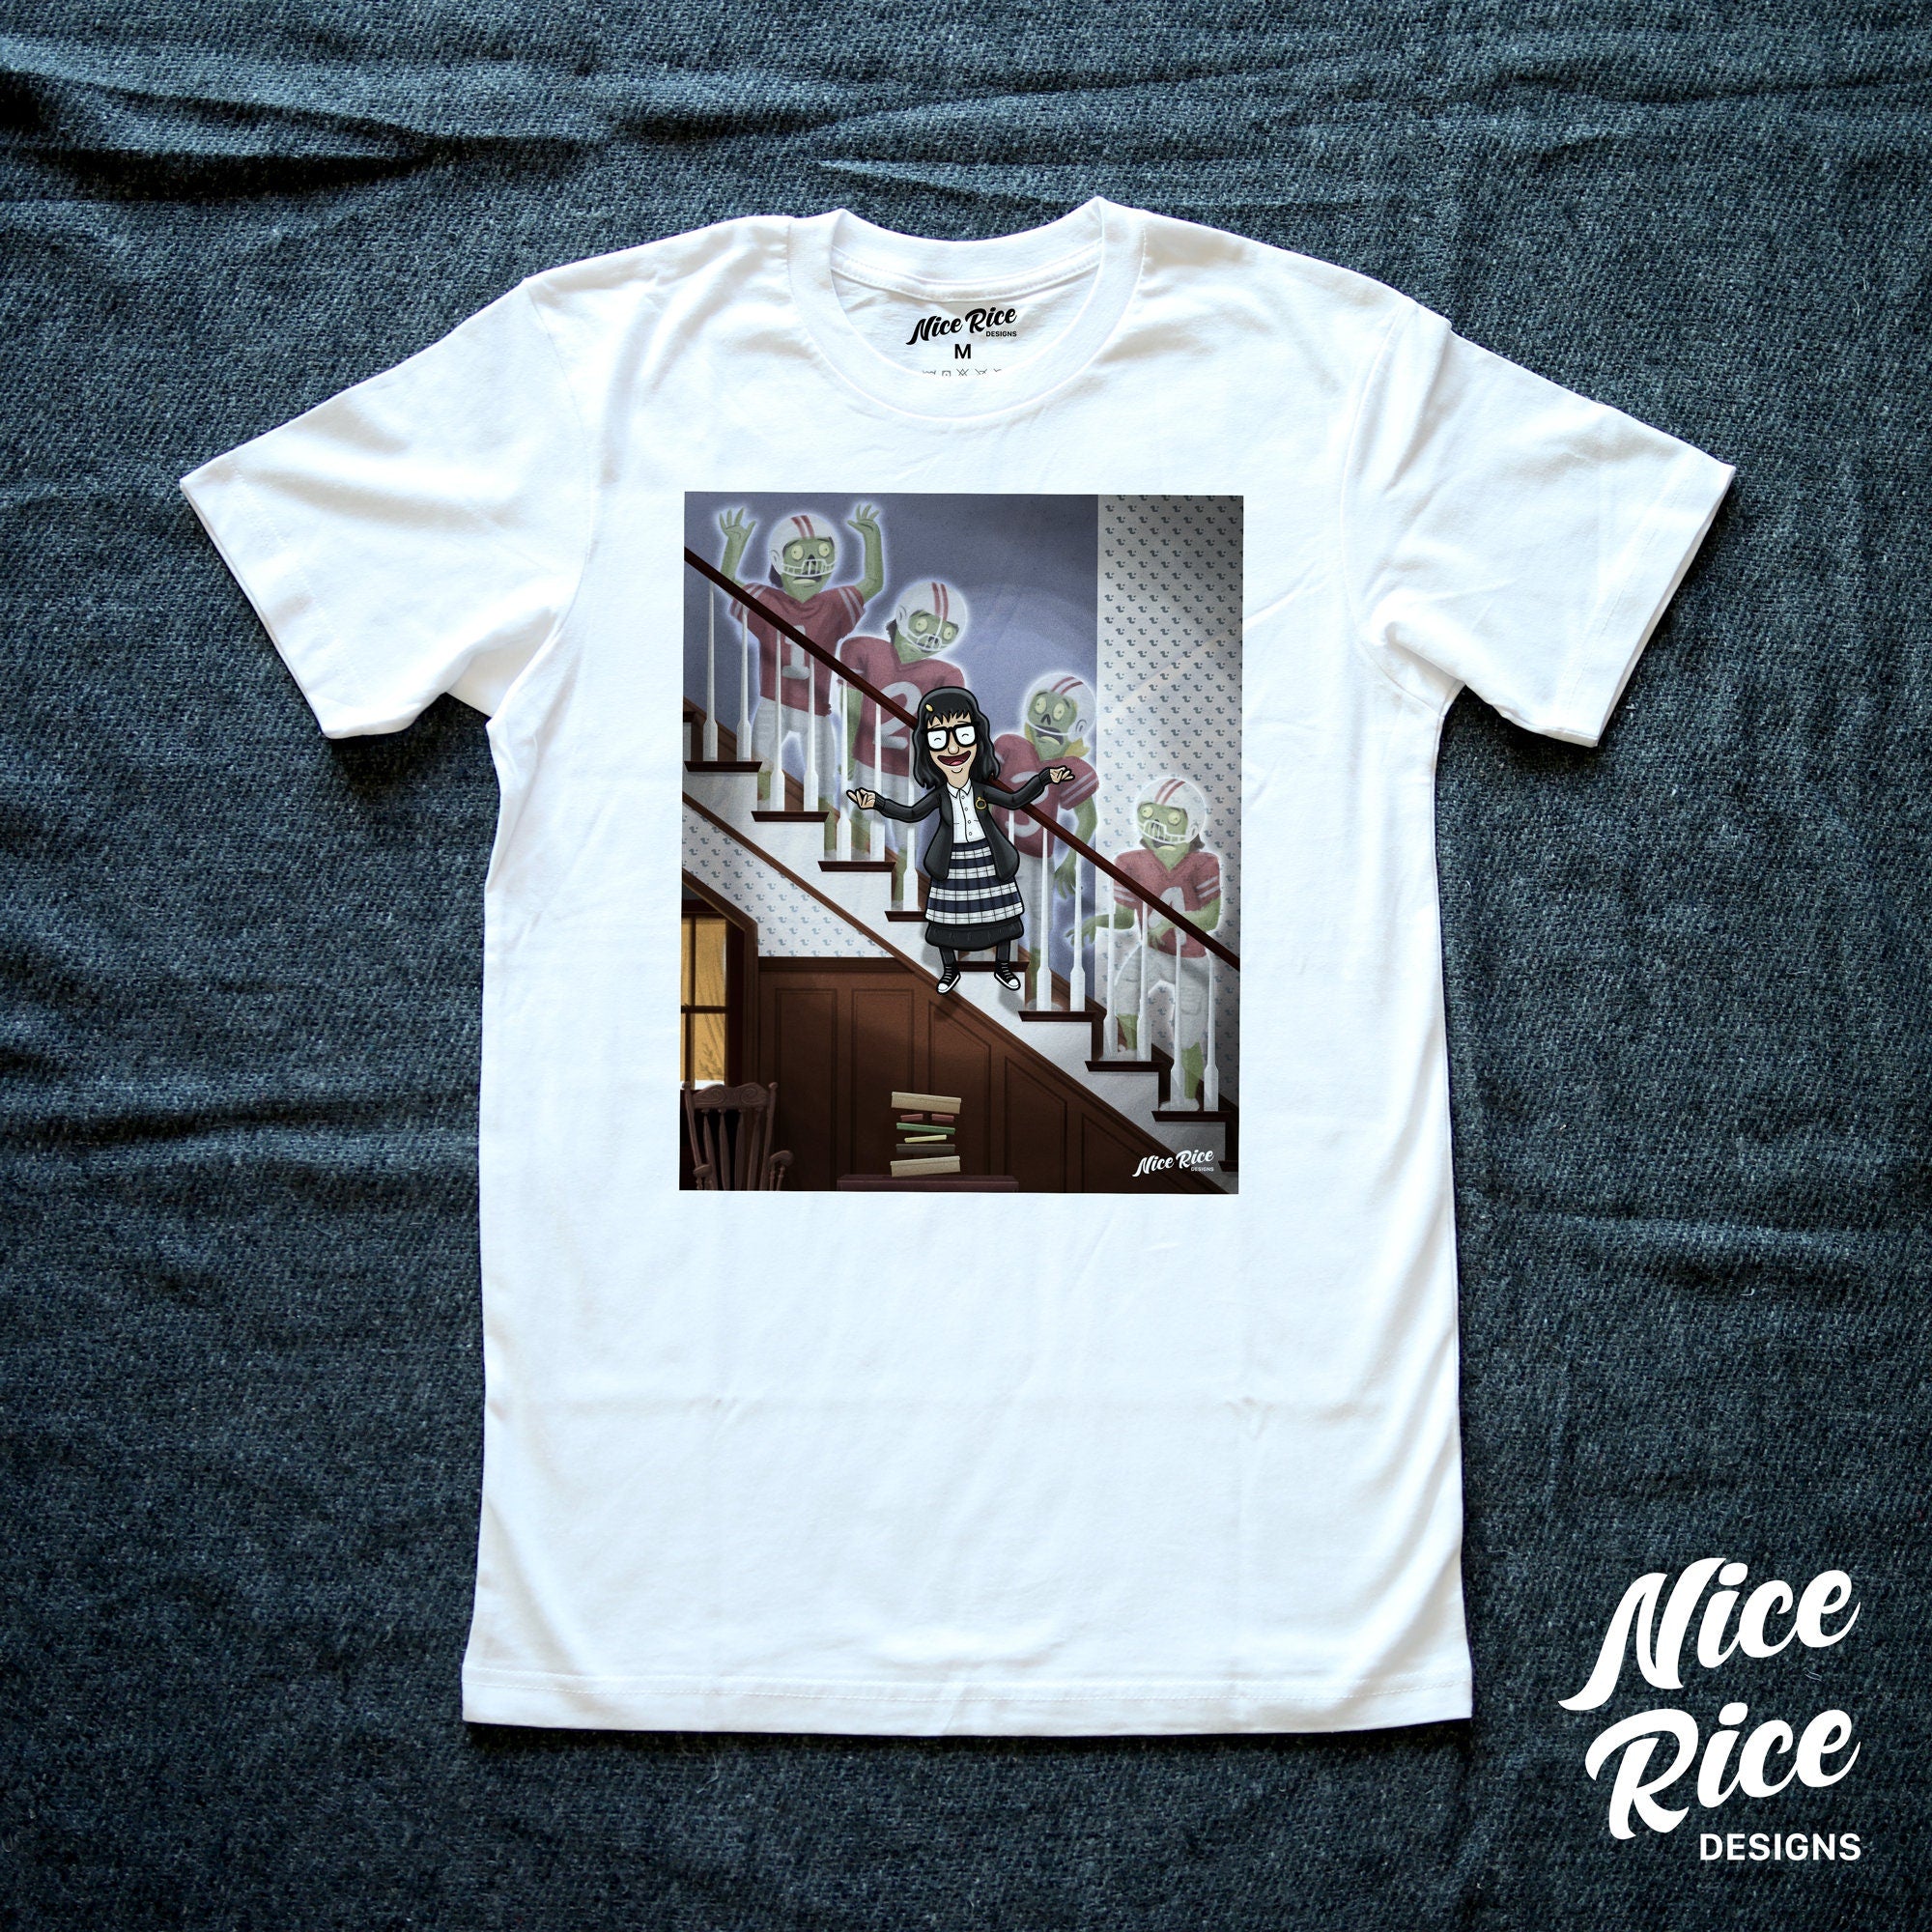 Jump in the Line Shirt by Nice Rice Designs